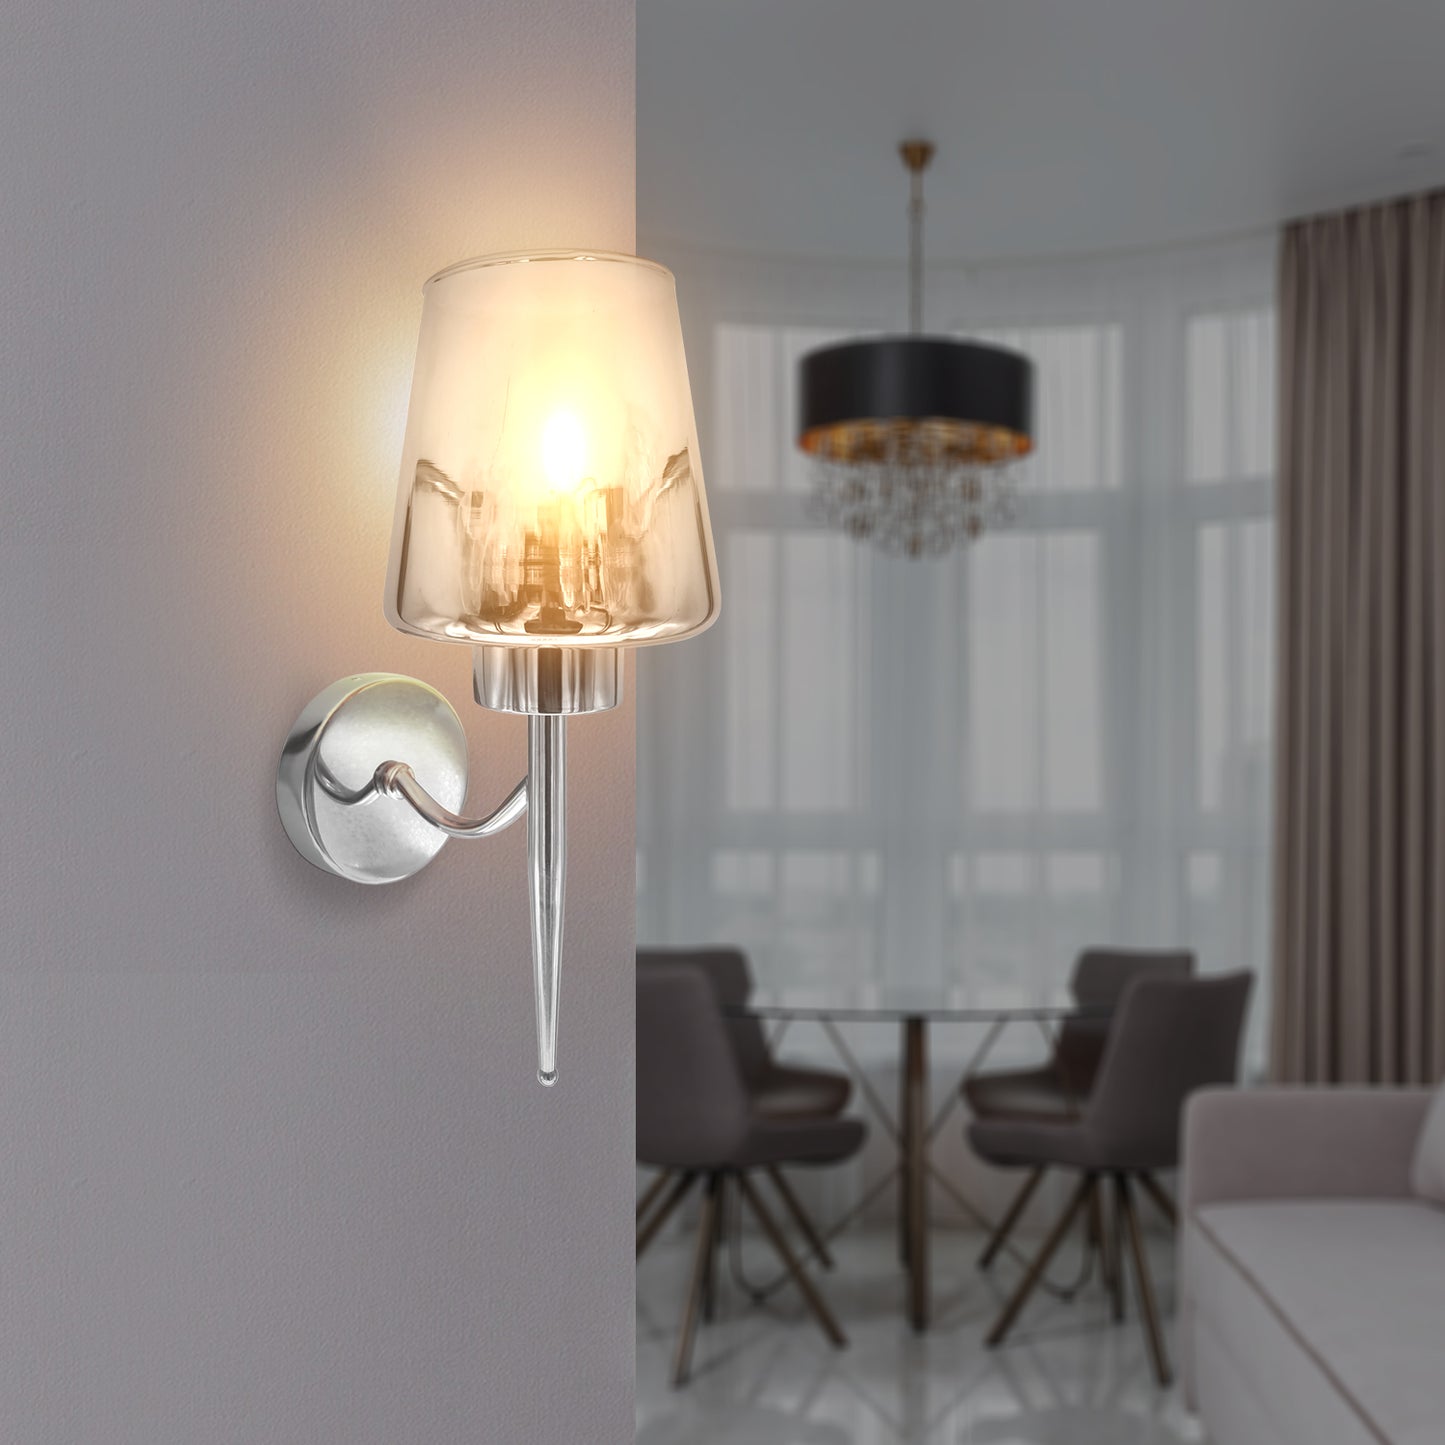 Modern Indoor sconces wall light-Smoked Glass Shade  -Application image